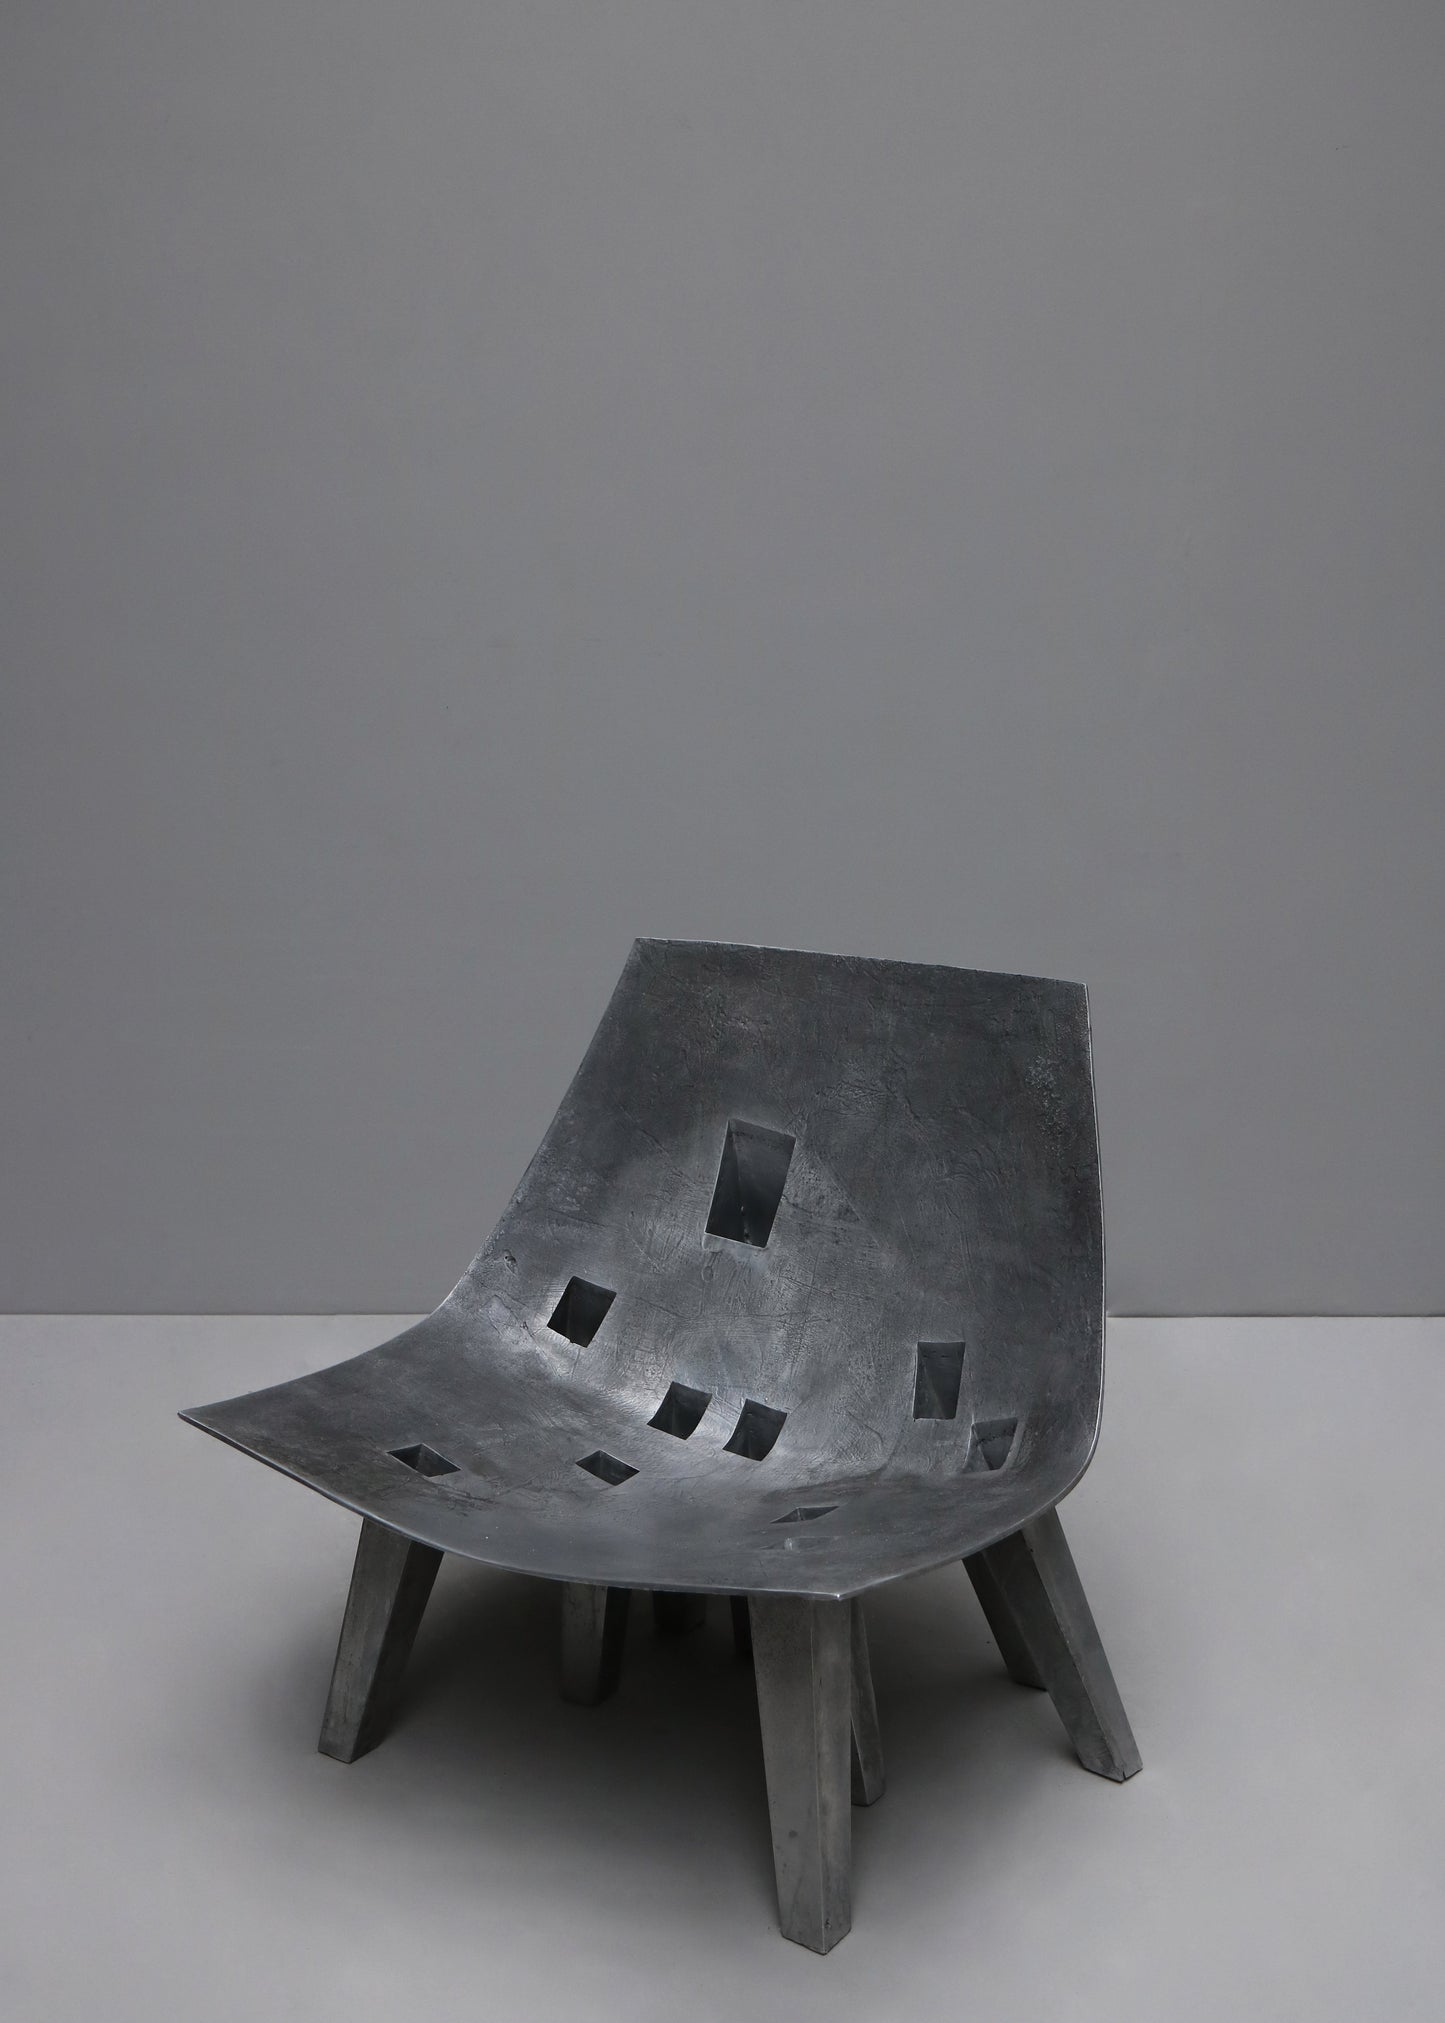 "EXTRUSION EASY CHAIR" BY JAN JANSSEN